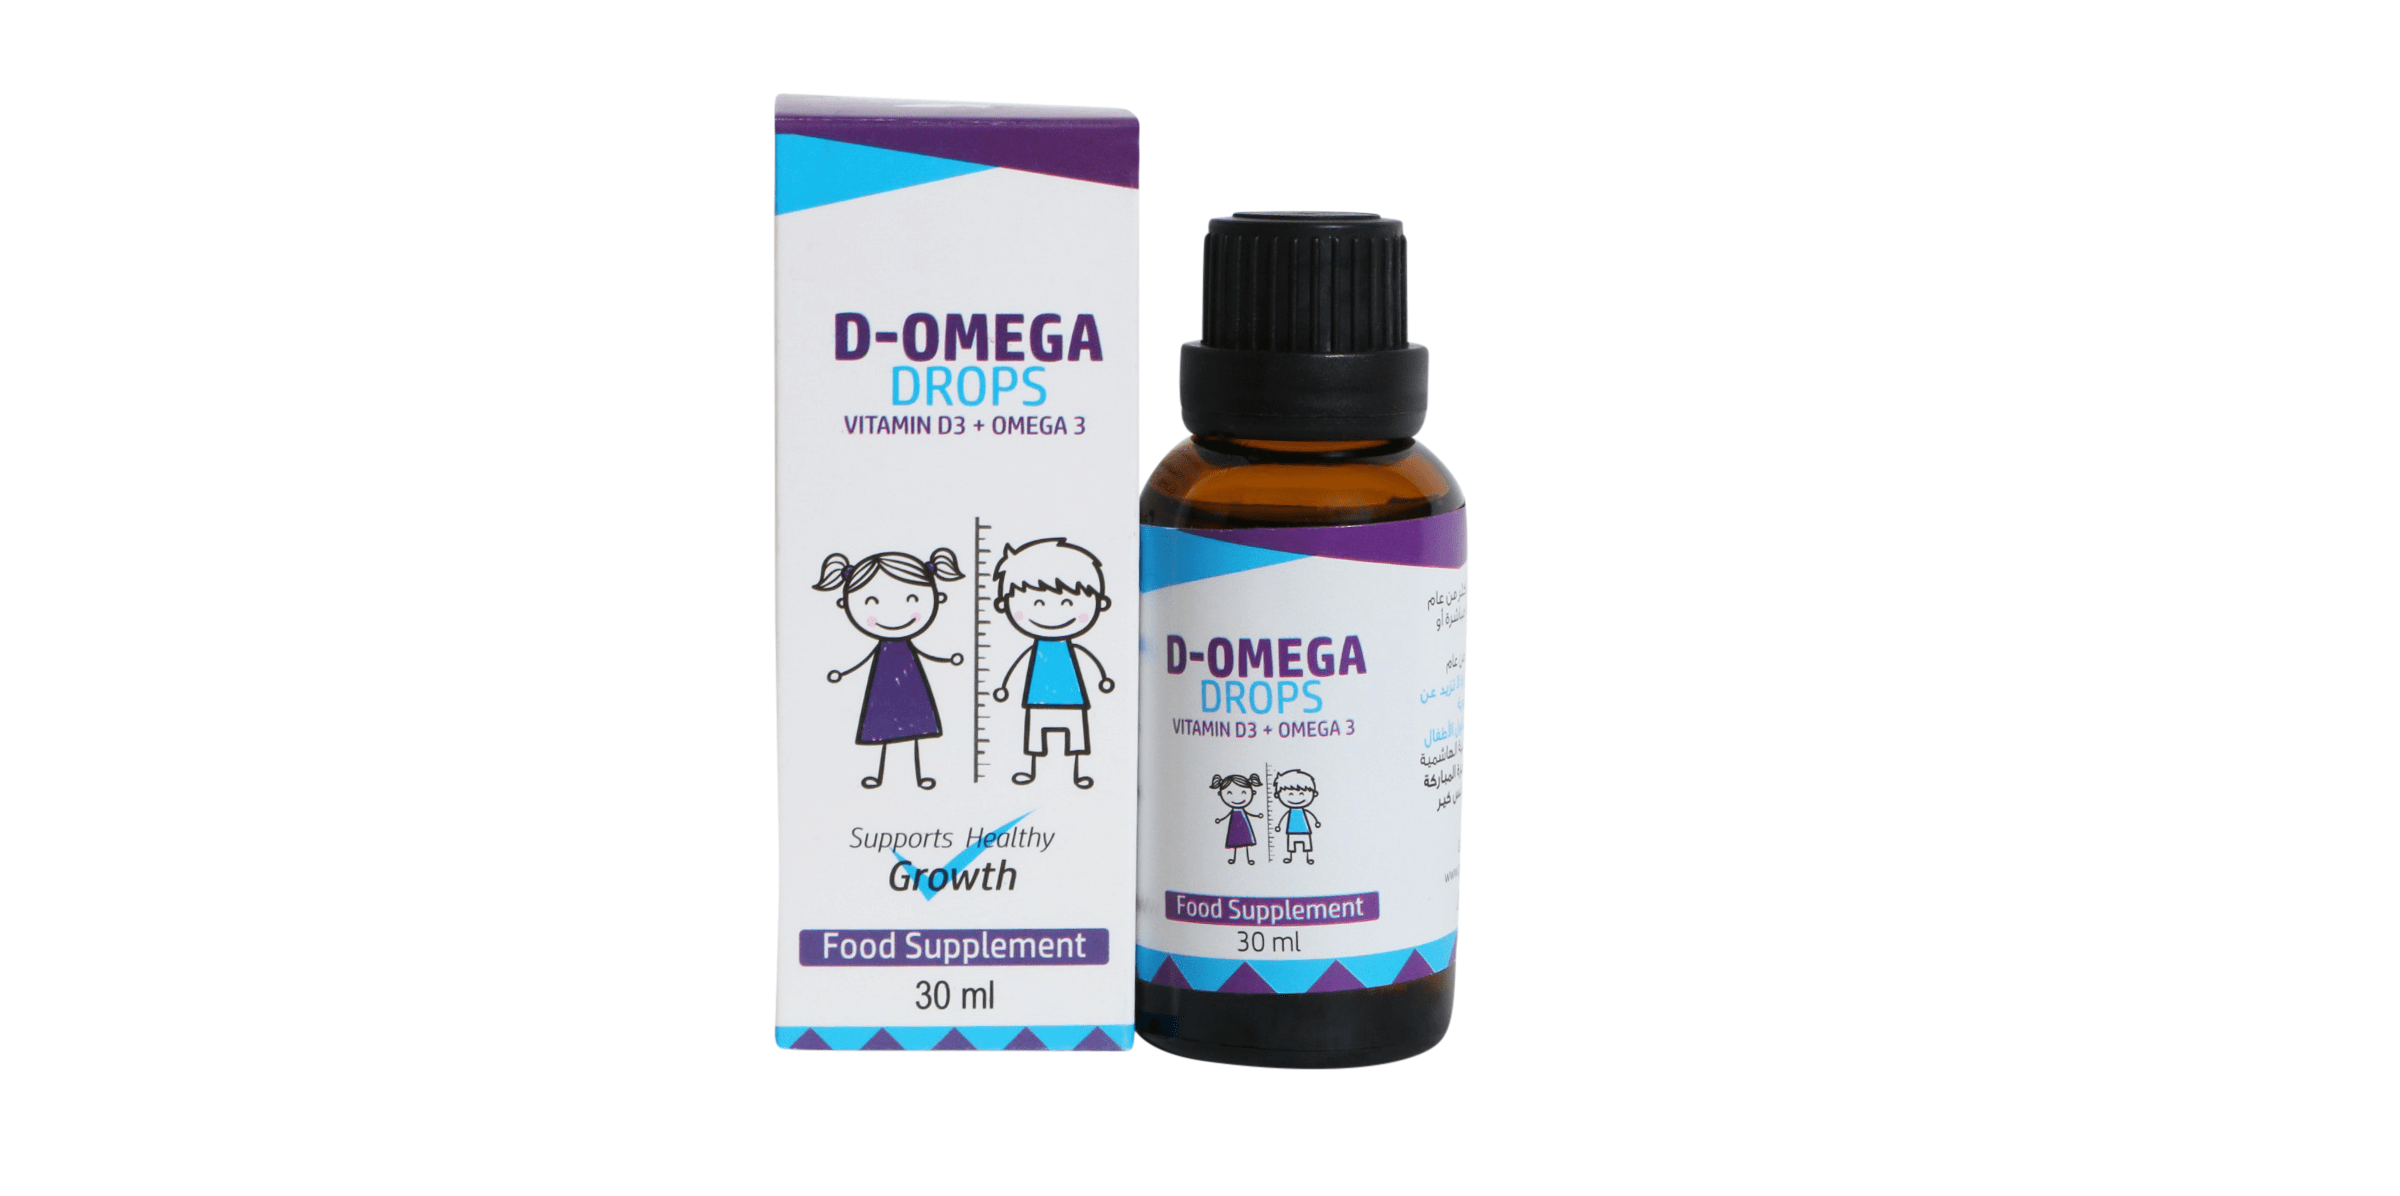 D-omega Drops Bottle and box